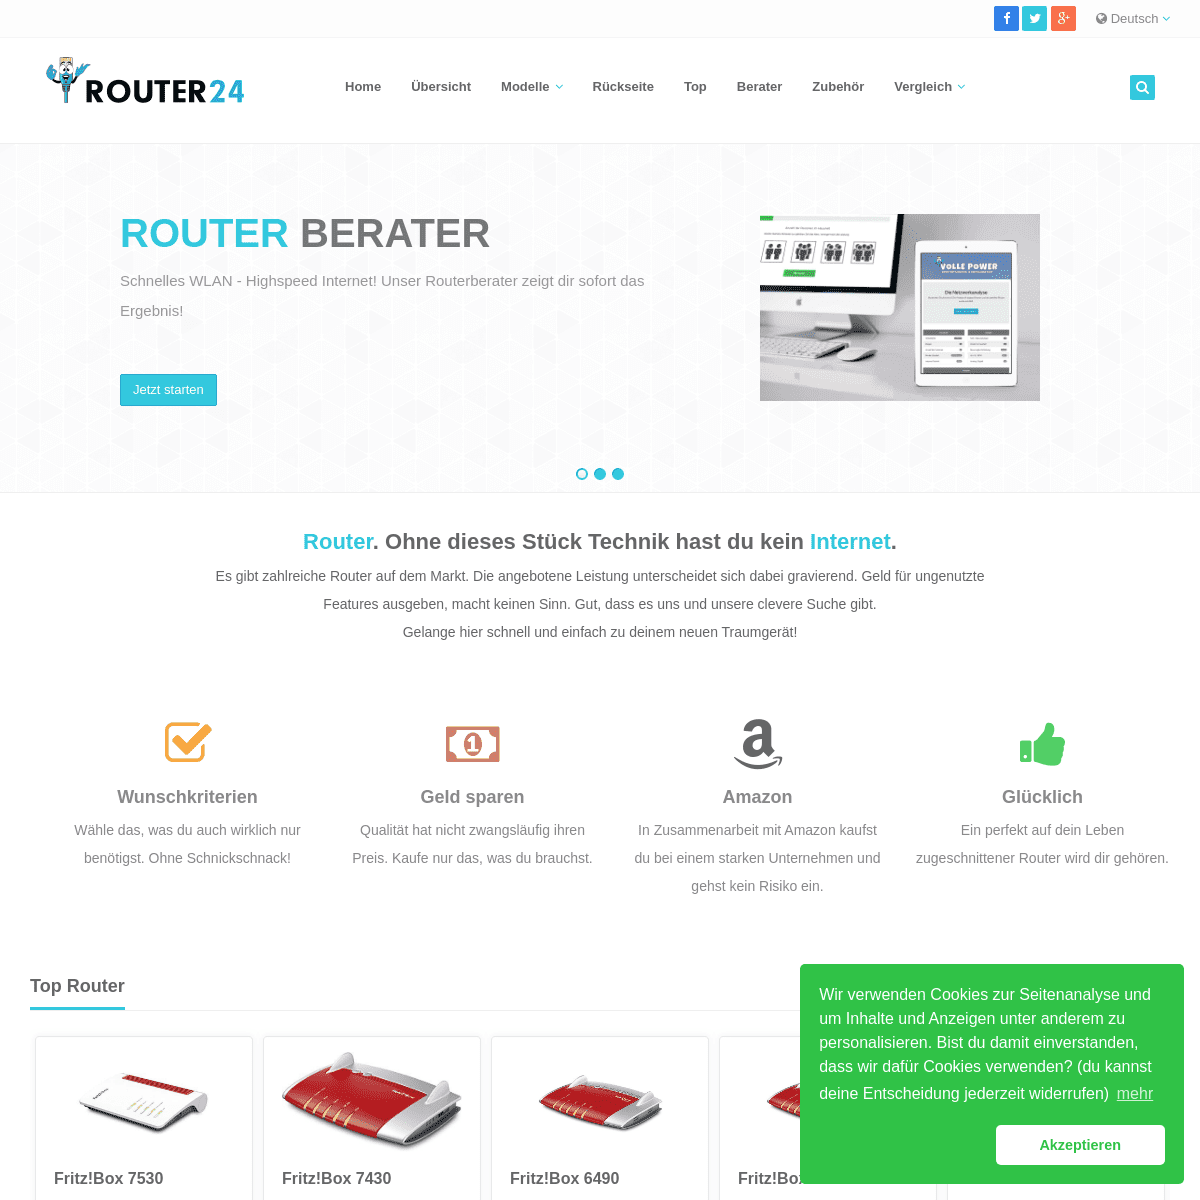 A complete backup of router24.info